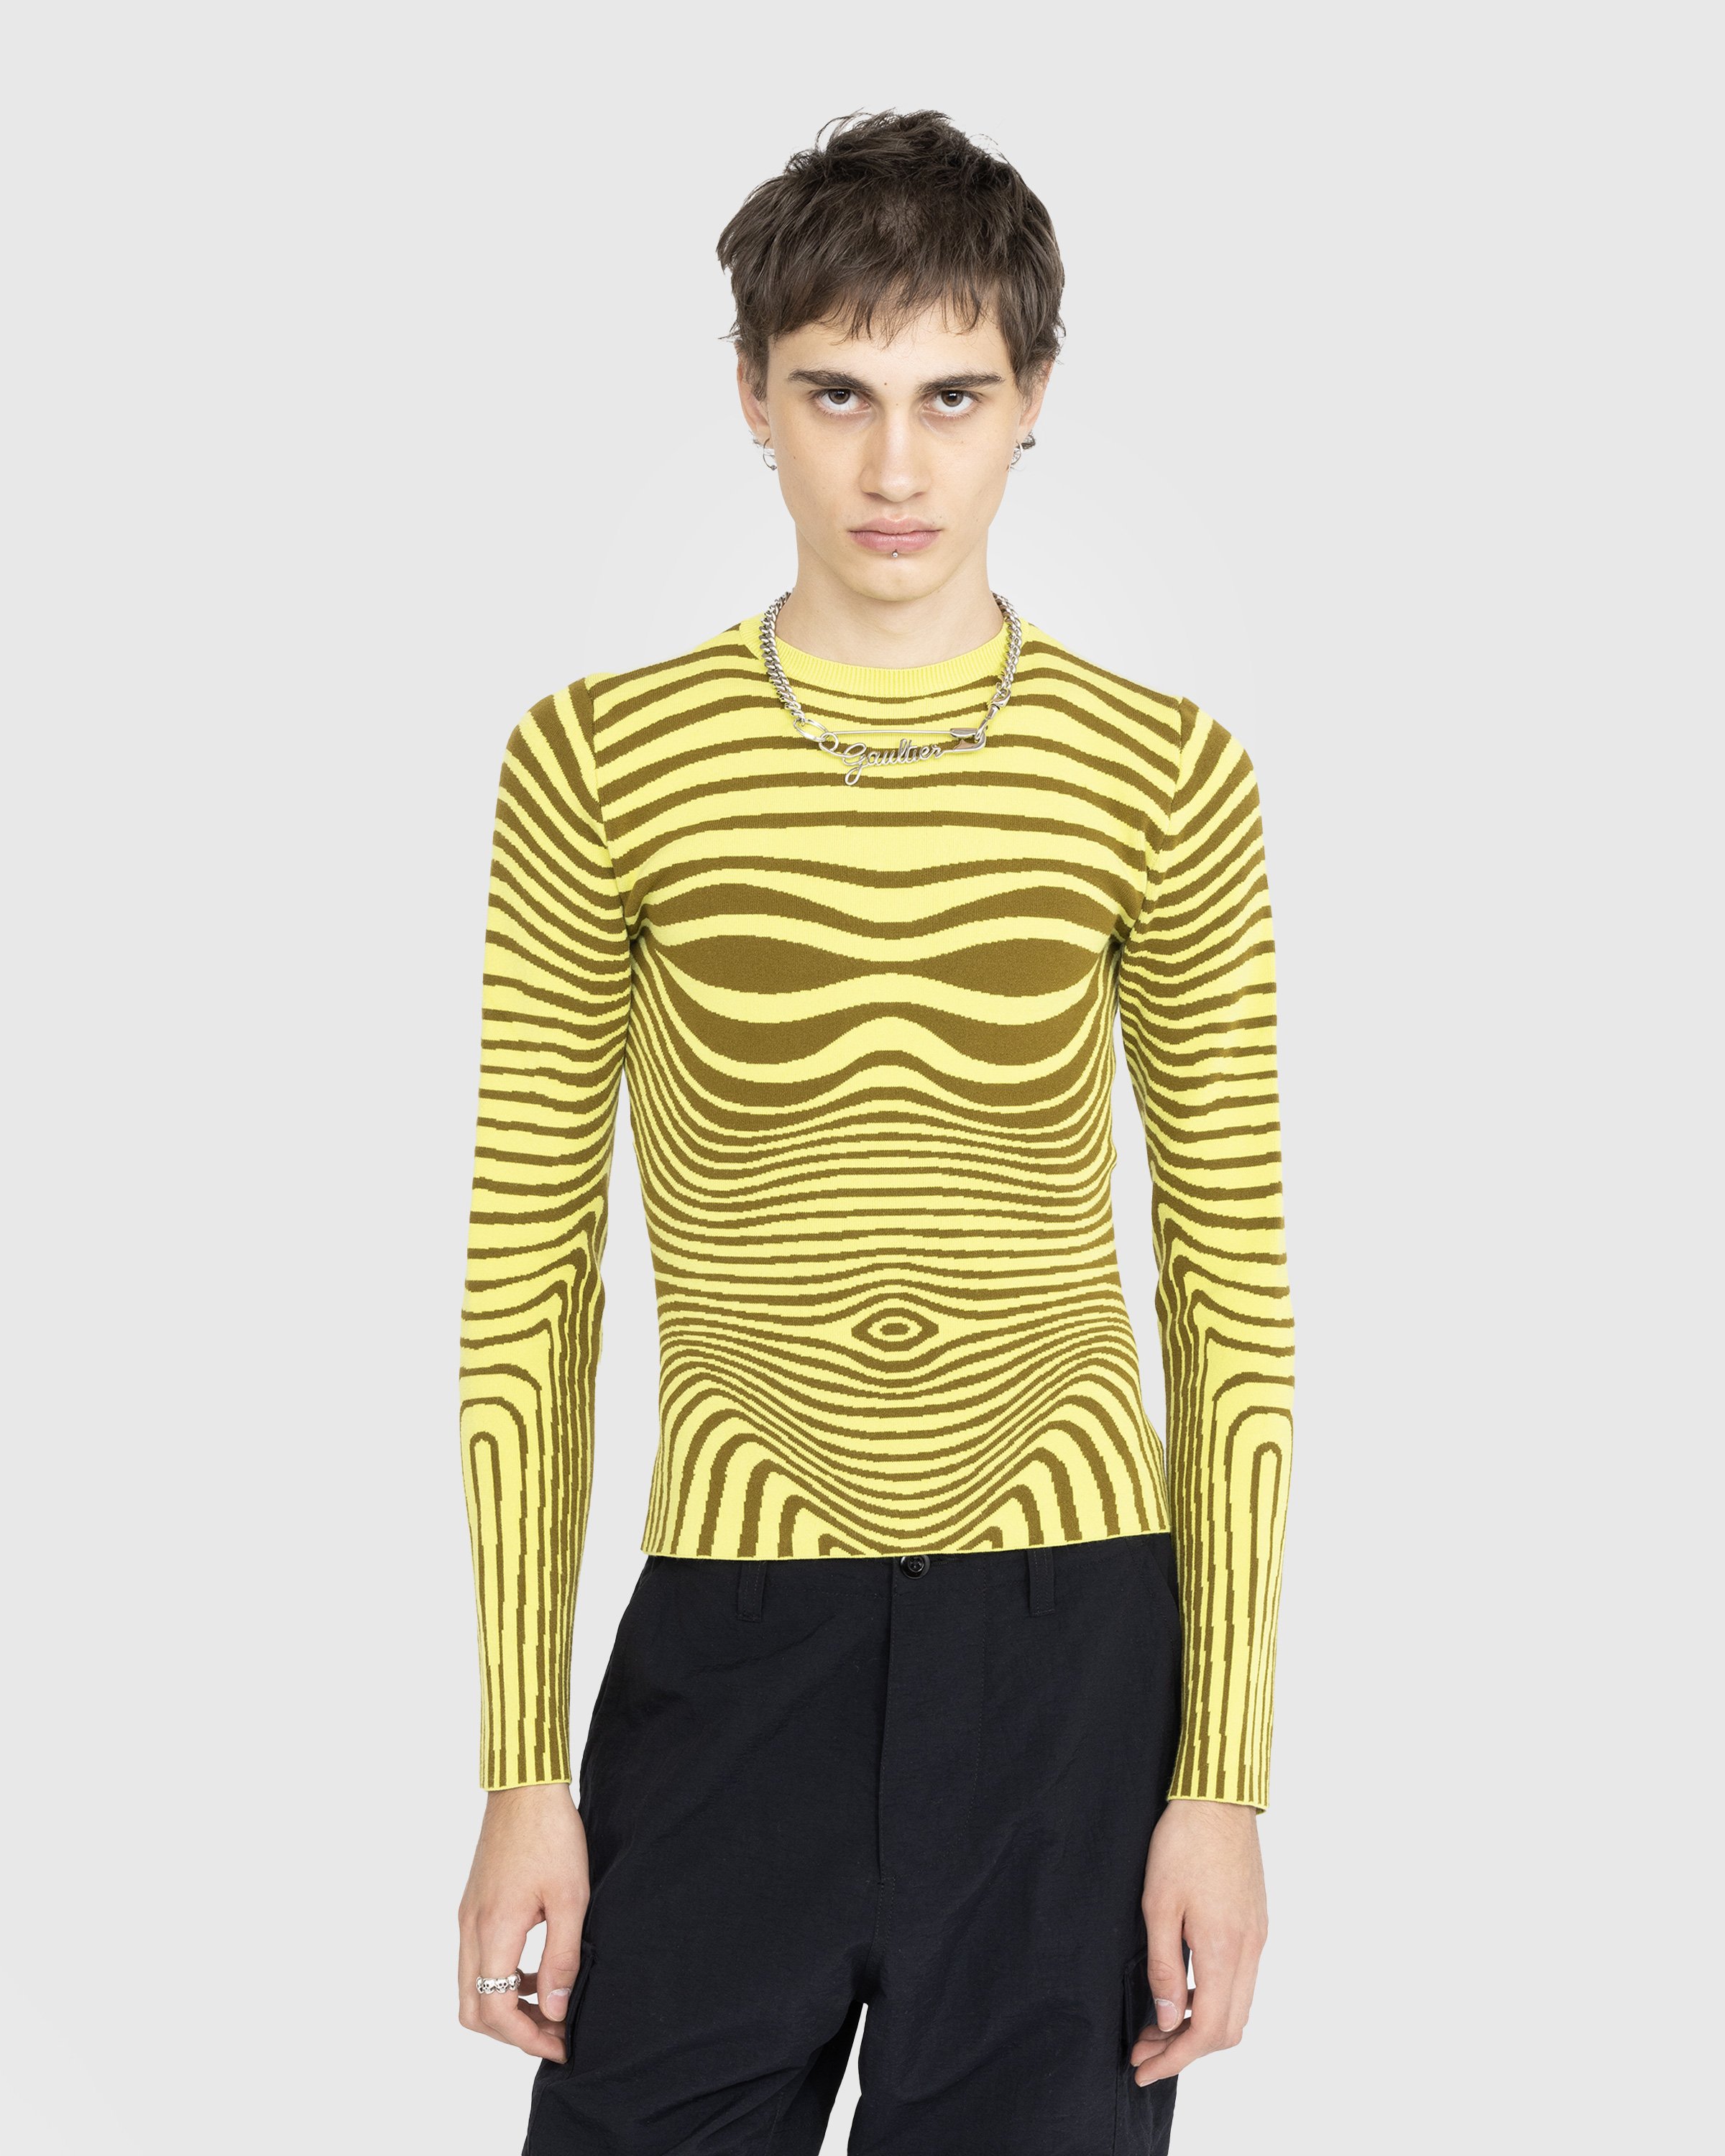 Jean Paul Gaultier - Long Sleeves Crew Neck Morphing Stripes Green - Clothing - Green - Image 2